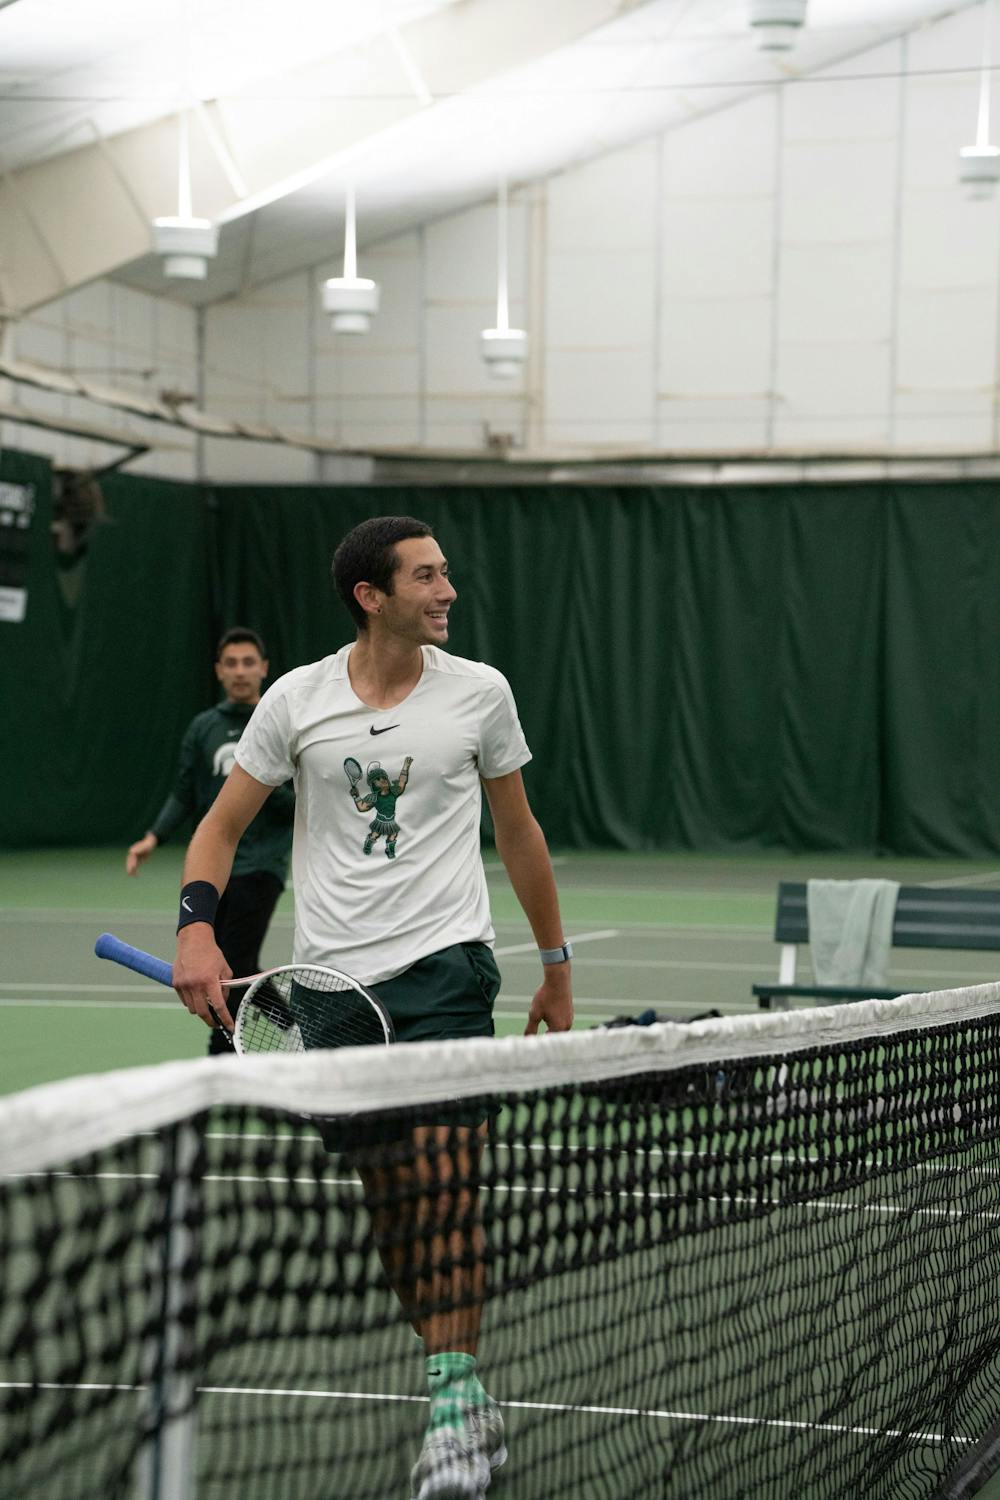 <p>Freshman Ozan Baris smiles after scoring a point against Michigan senior Ondrej Styler at the MSU Tennis Center on March 30, 2023. The Spartans lost to the Wolverines 6-1.</p>